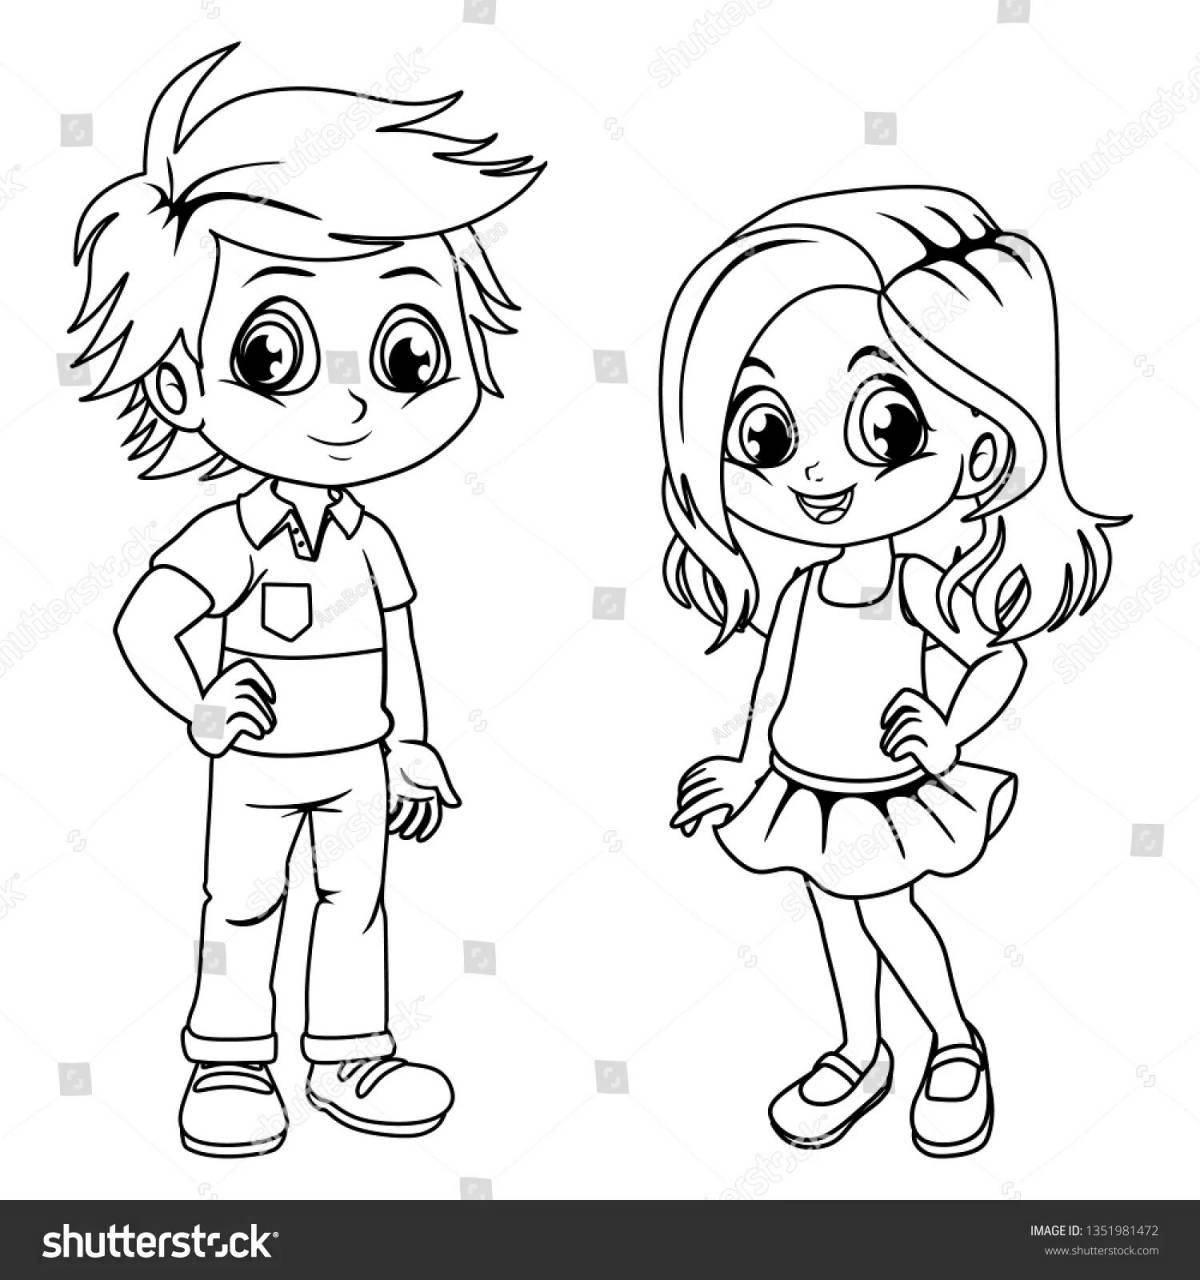 Playful coloring girl and boy drawing